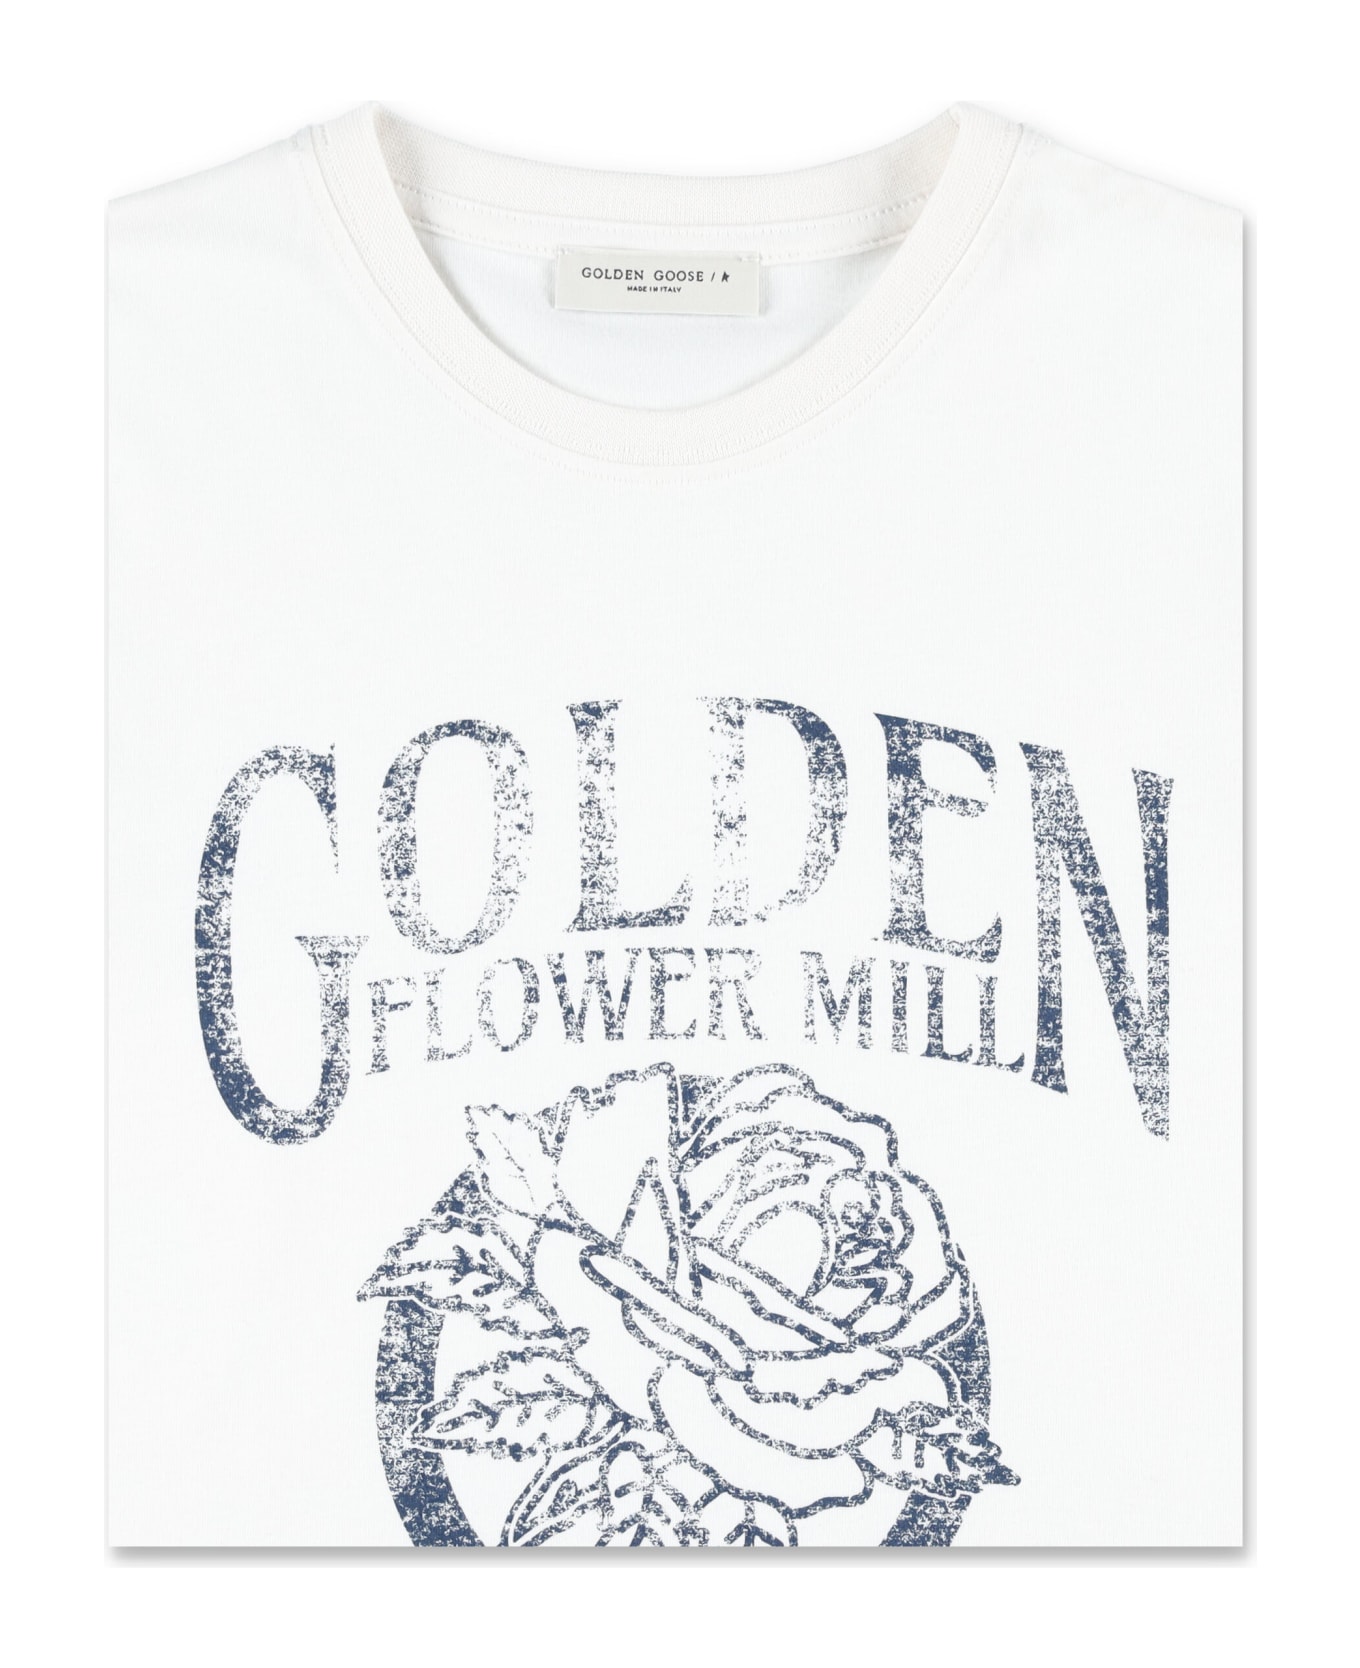 Golden Goose Printed T-shirt - ARTIC WOLF Tシャツ＆ポロシャツ